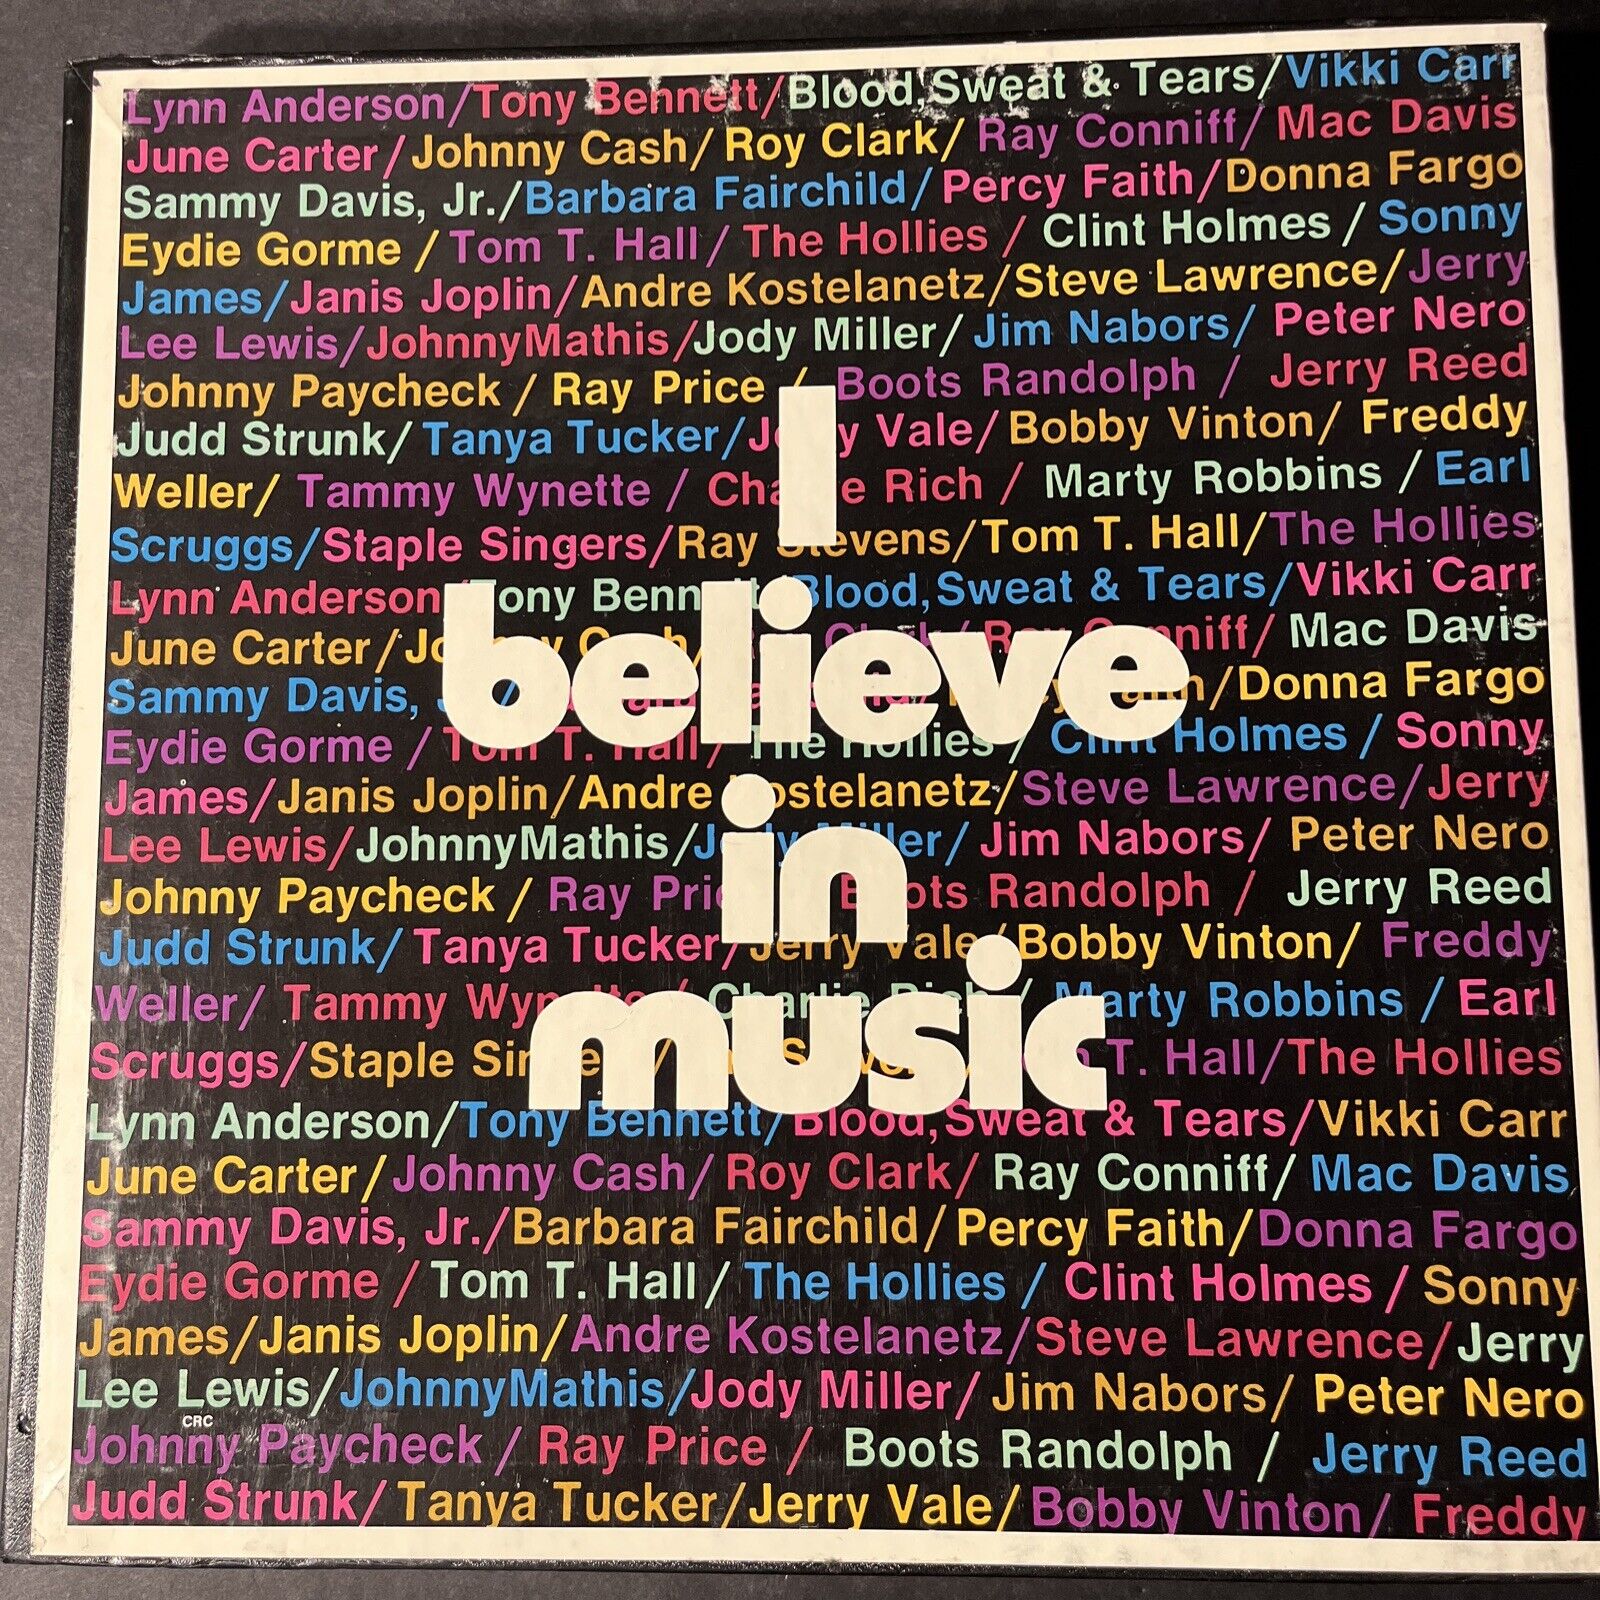 "I Believe in Music" - Columbia House Musial Treasury - 6LPs, 1974, Box Set